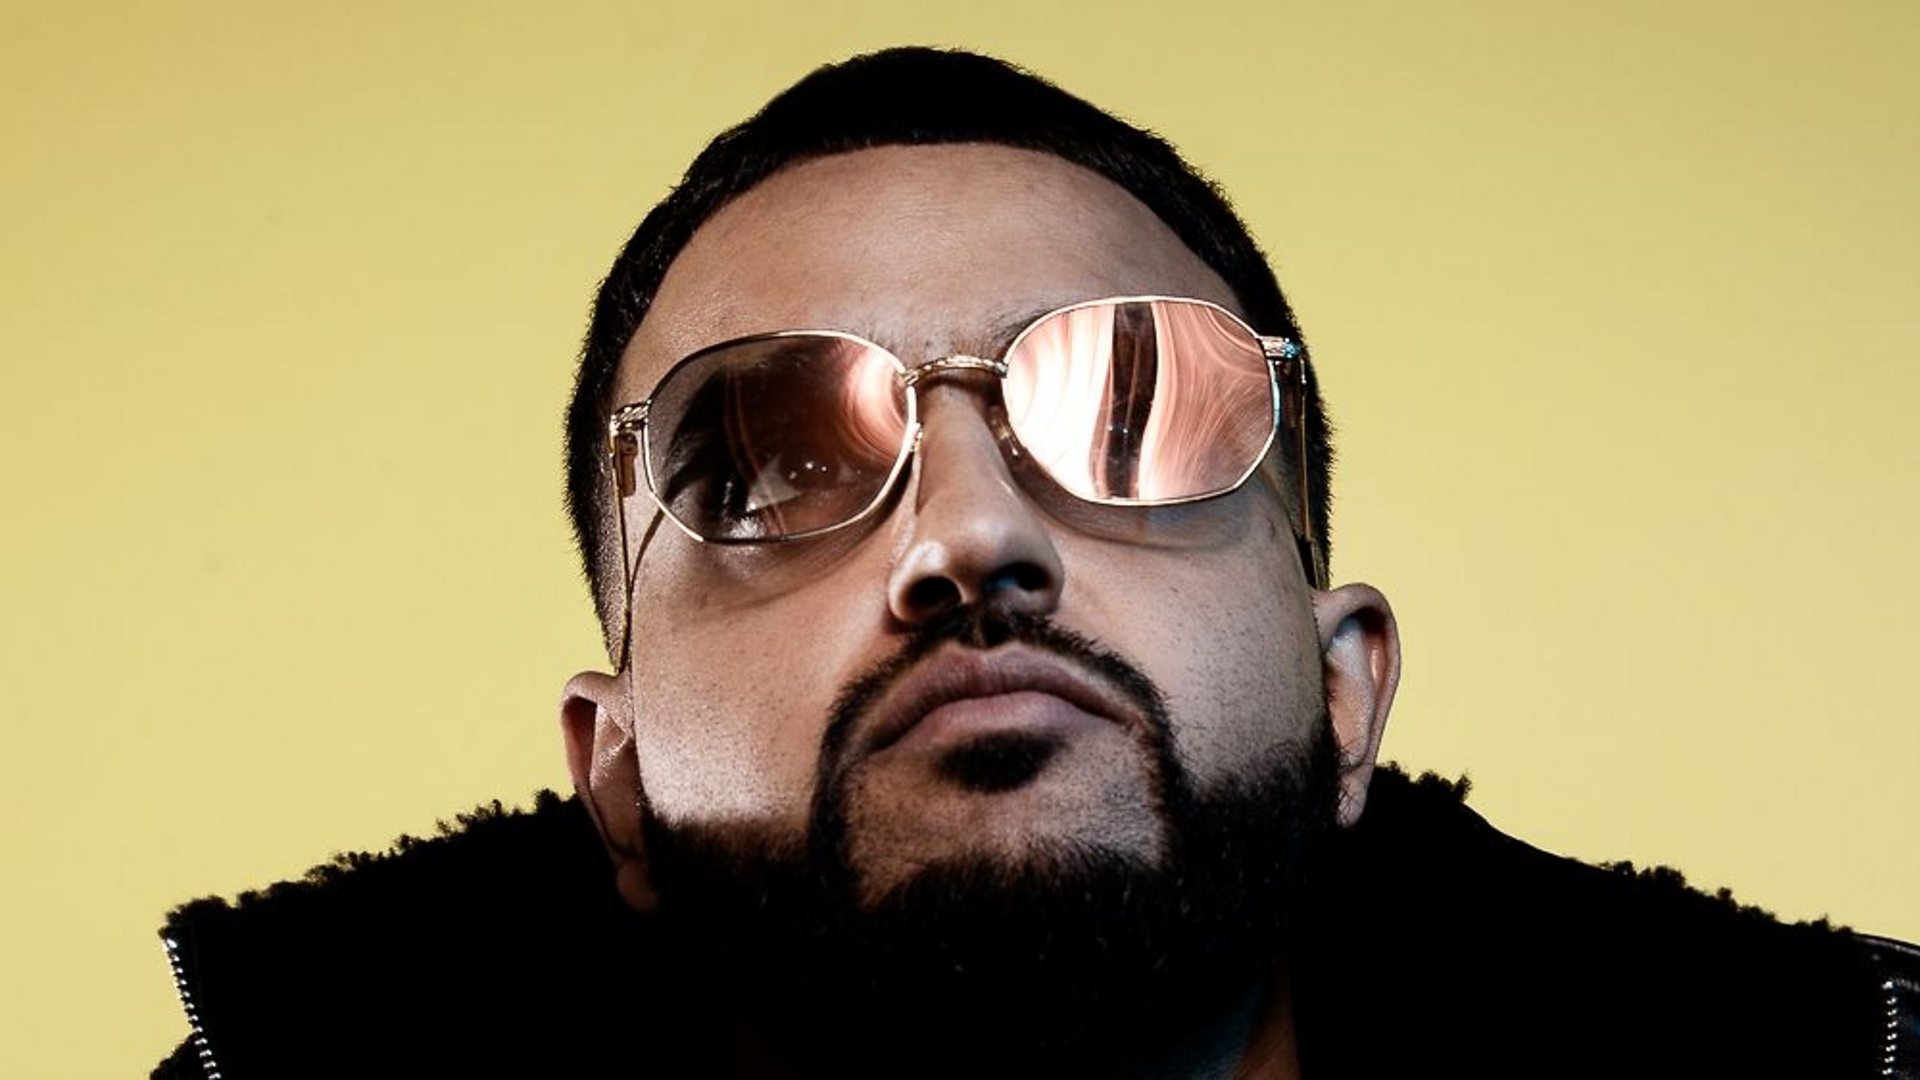 NAV, Canadian Indian rapper, topped charts, United States, 1920x1080 Full HD Desktop